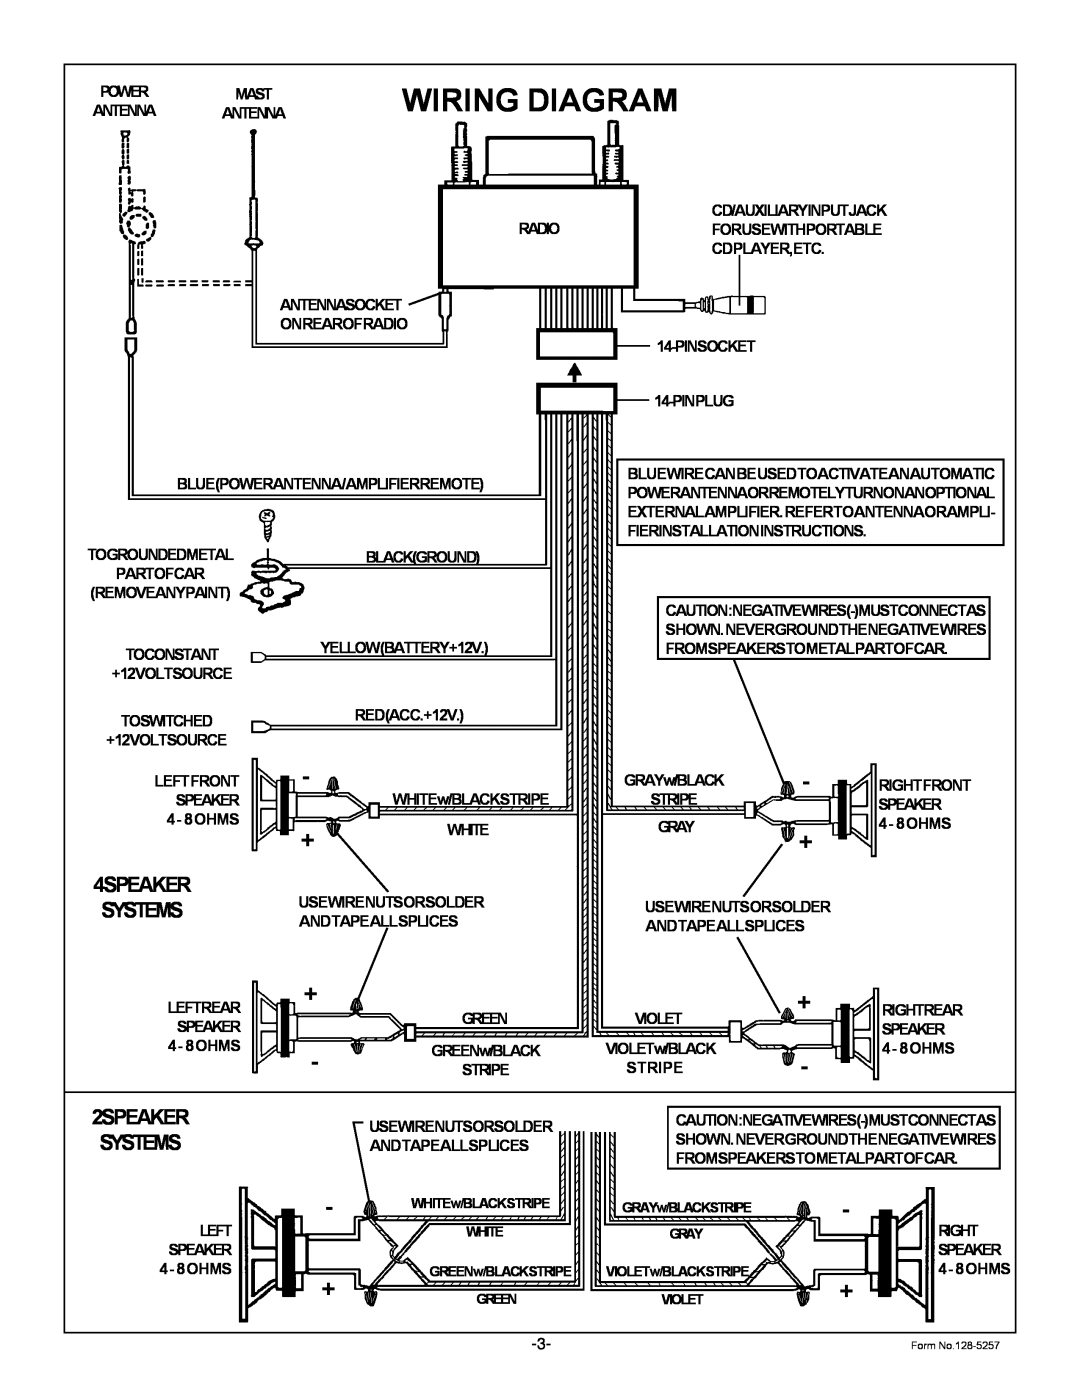 Audiovox Home Theater Sytem installation instructions Wiring Diagram 